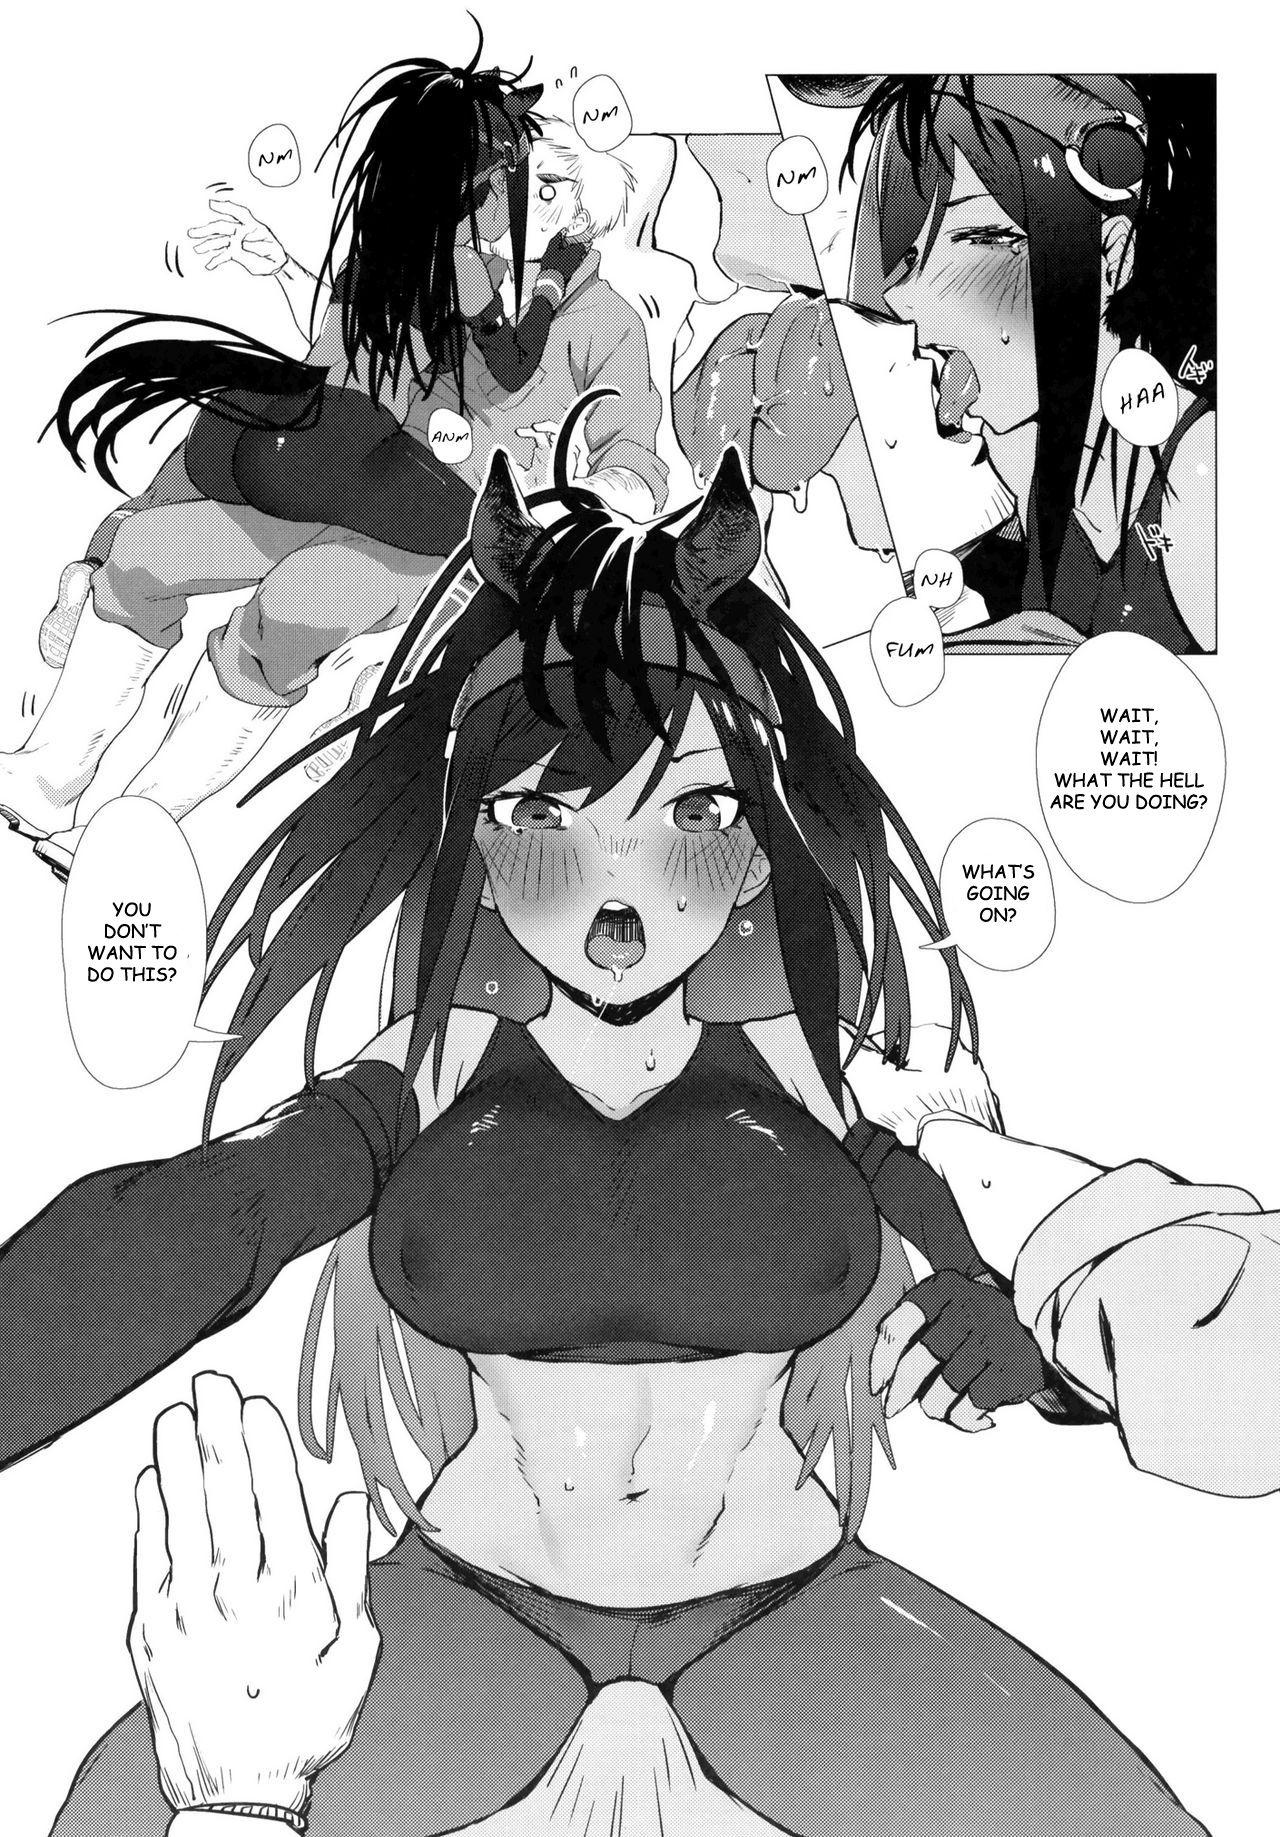 Gilf Thoroughbred Early Days - Kemono friends Ballbusting - Page 5